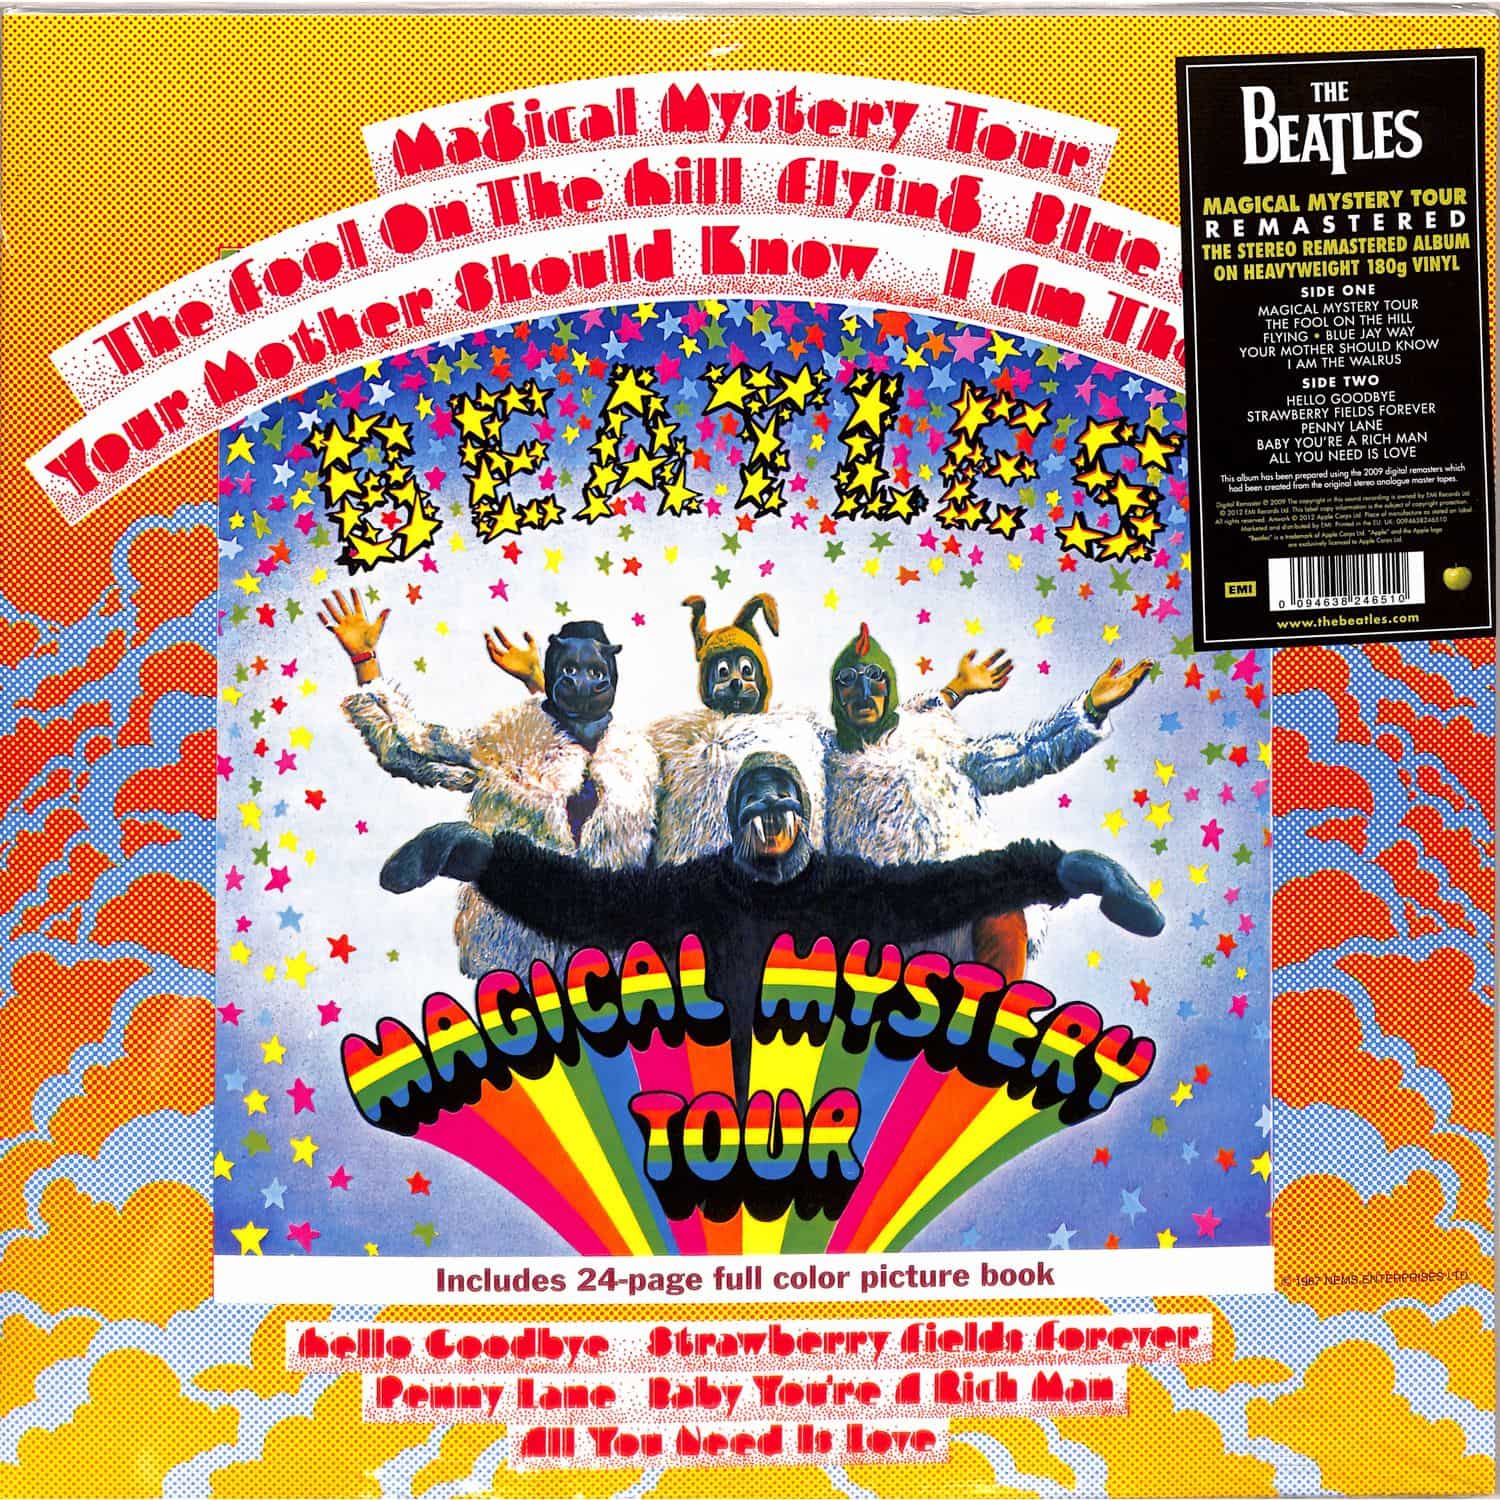 The Beatles - MAGICAL MYSTERY TOUR 